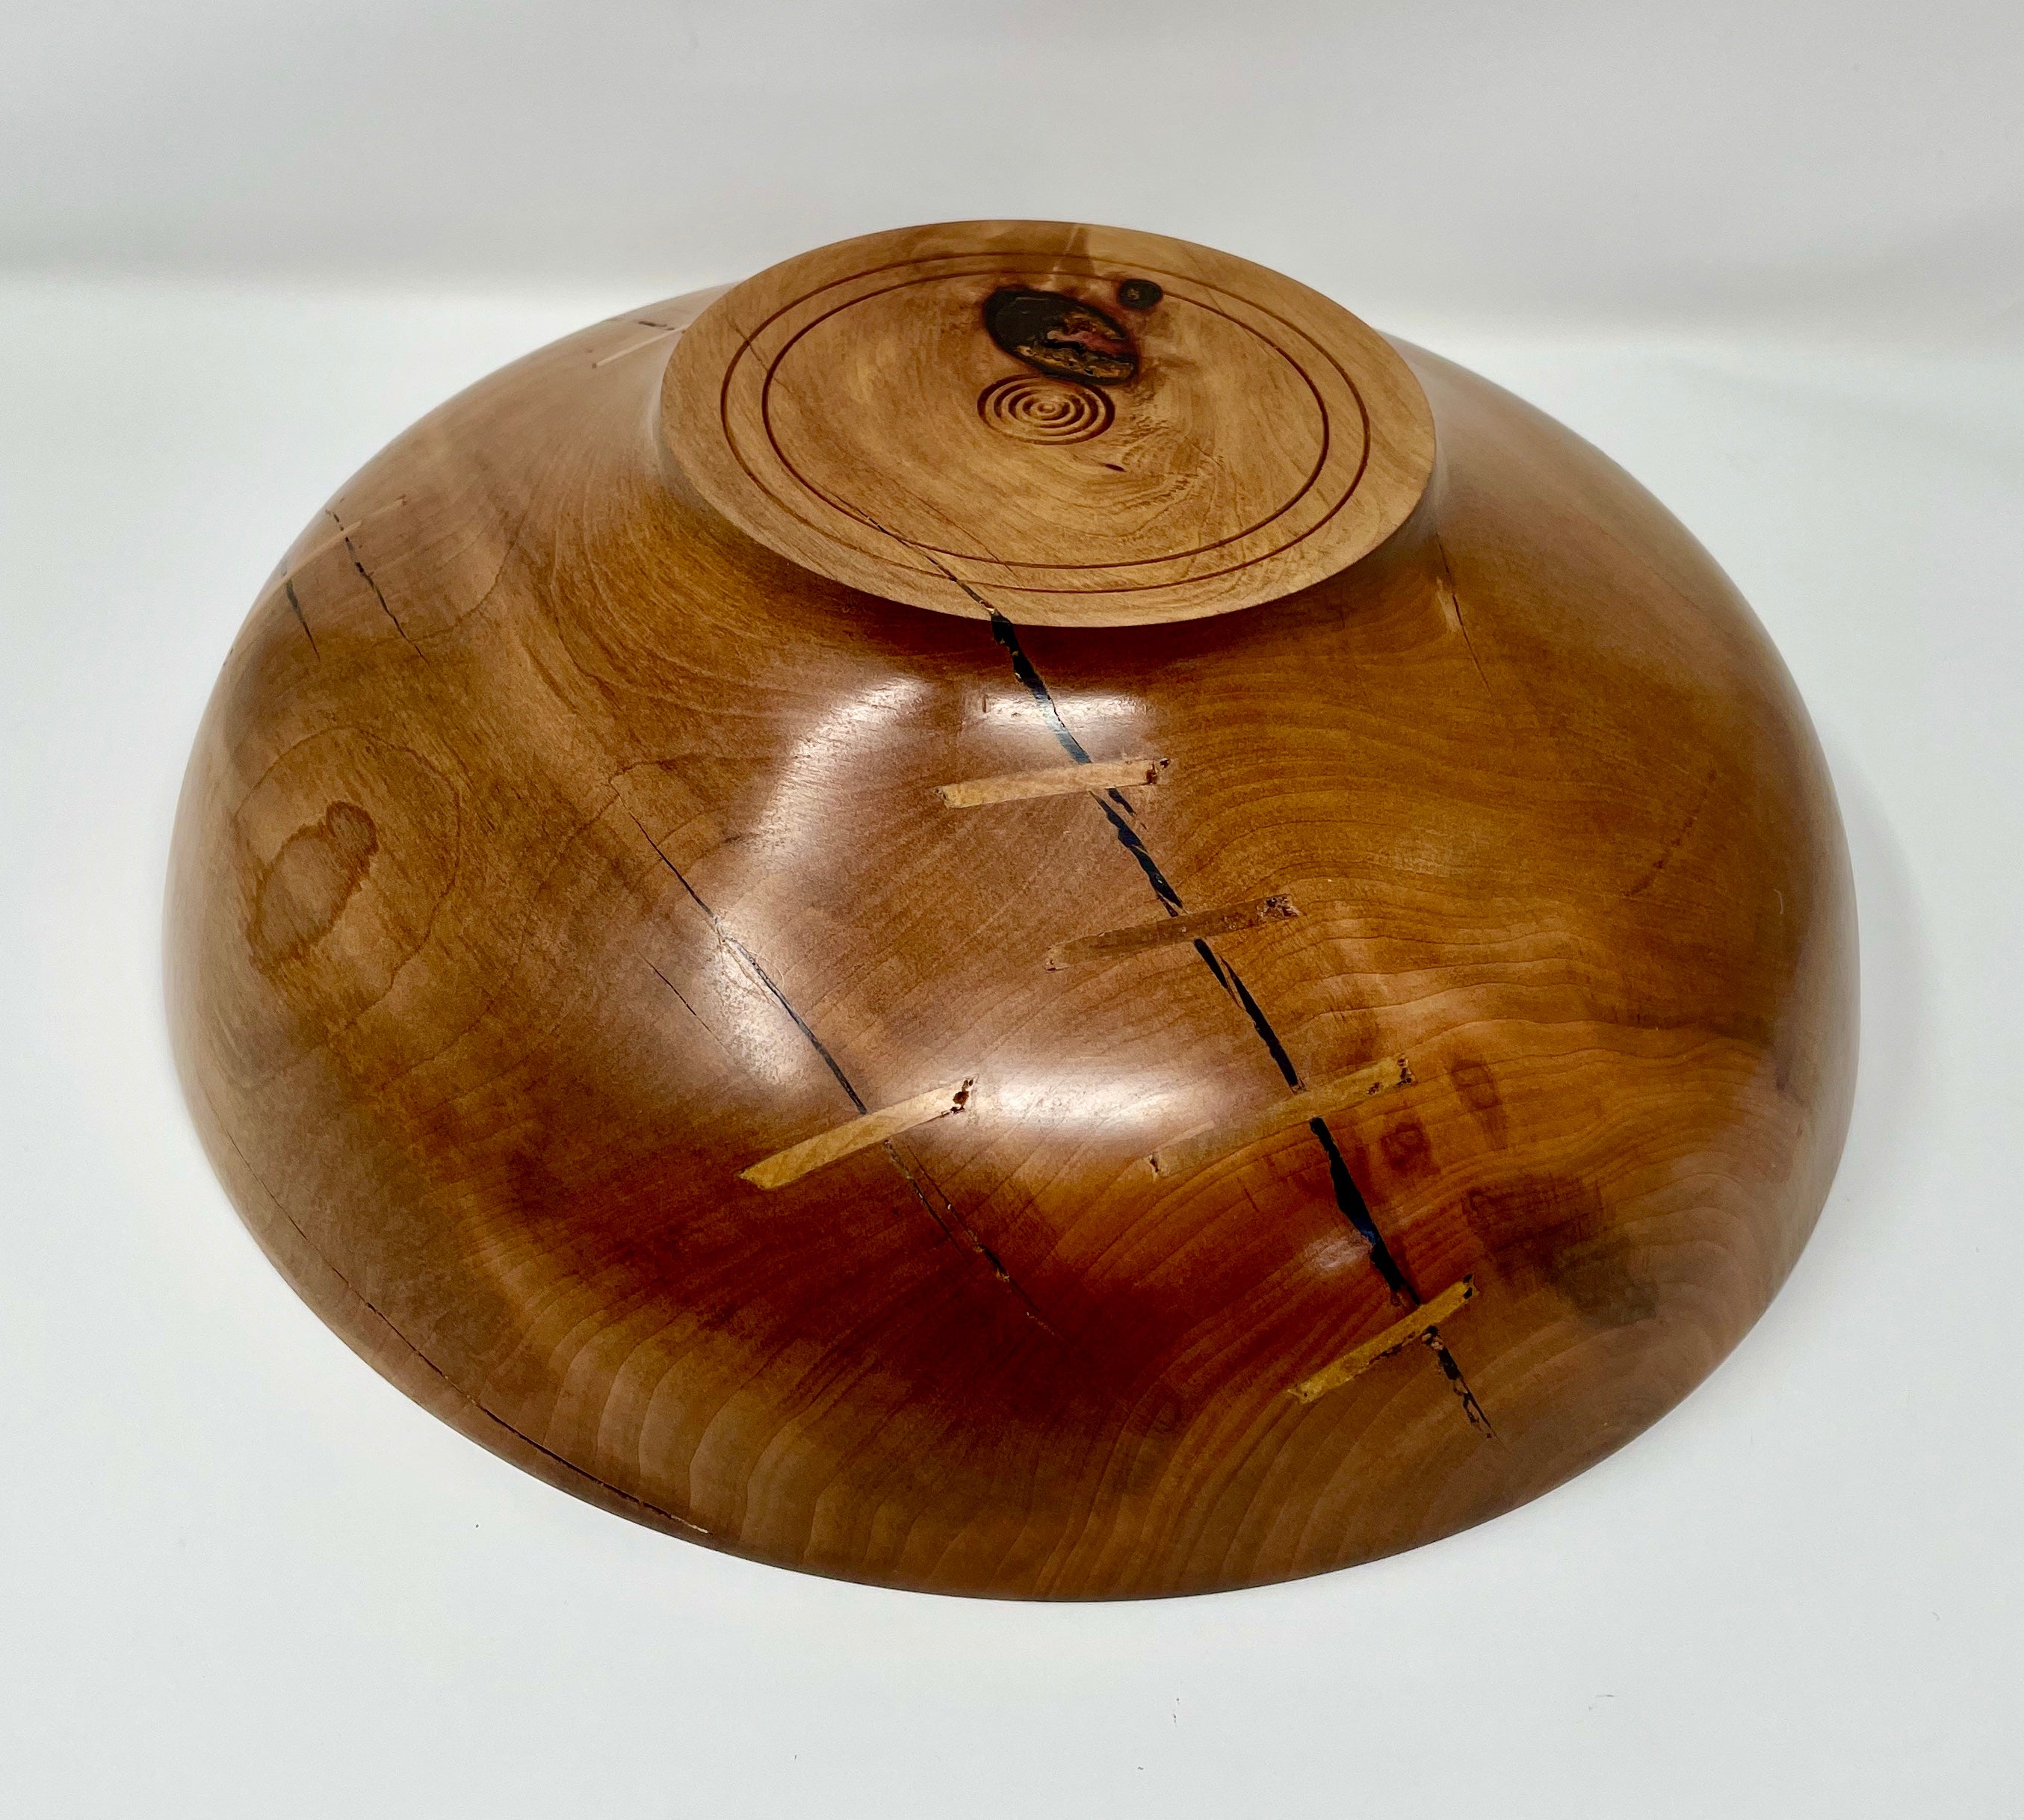 Madrone Bowl with Character and Attitude